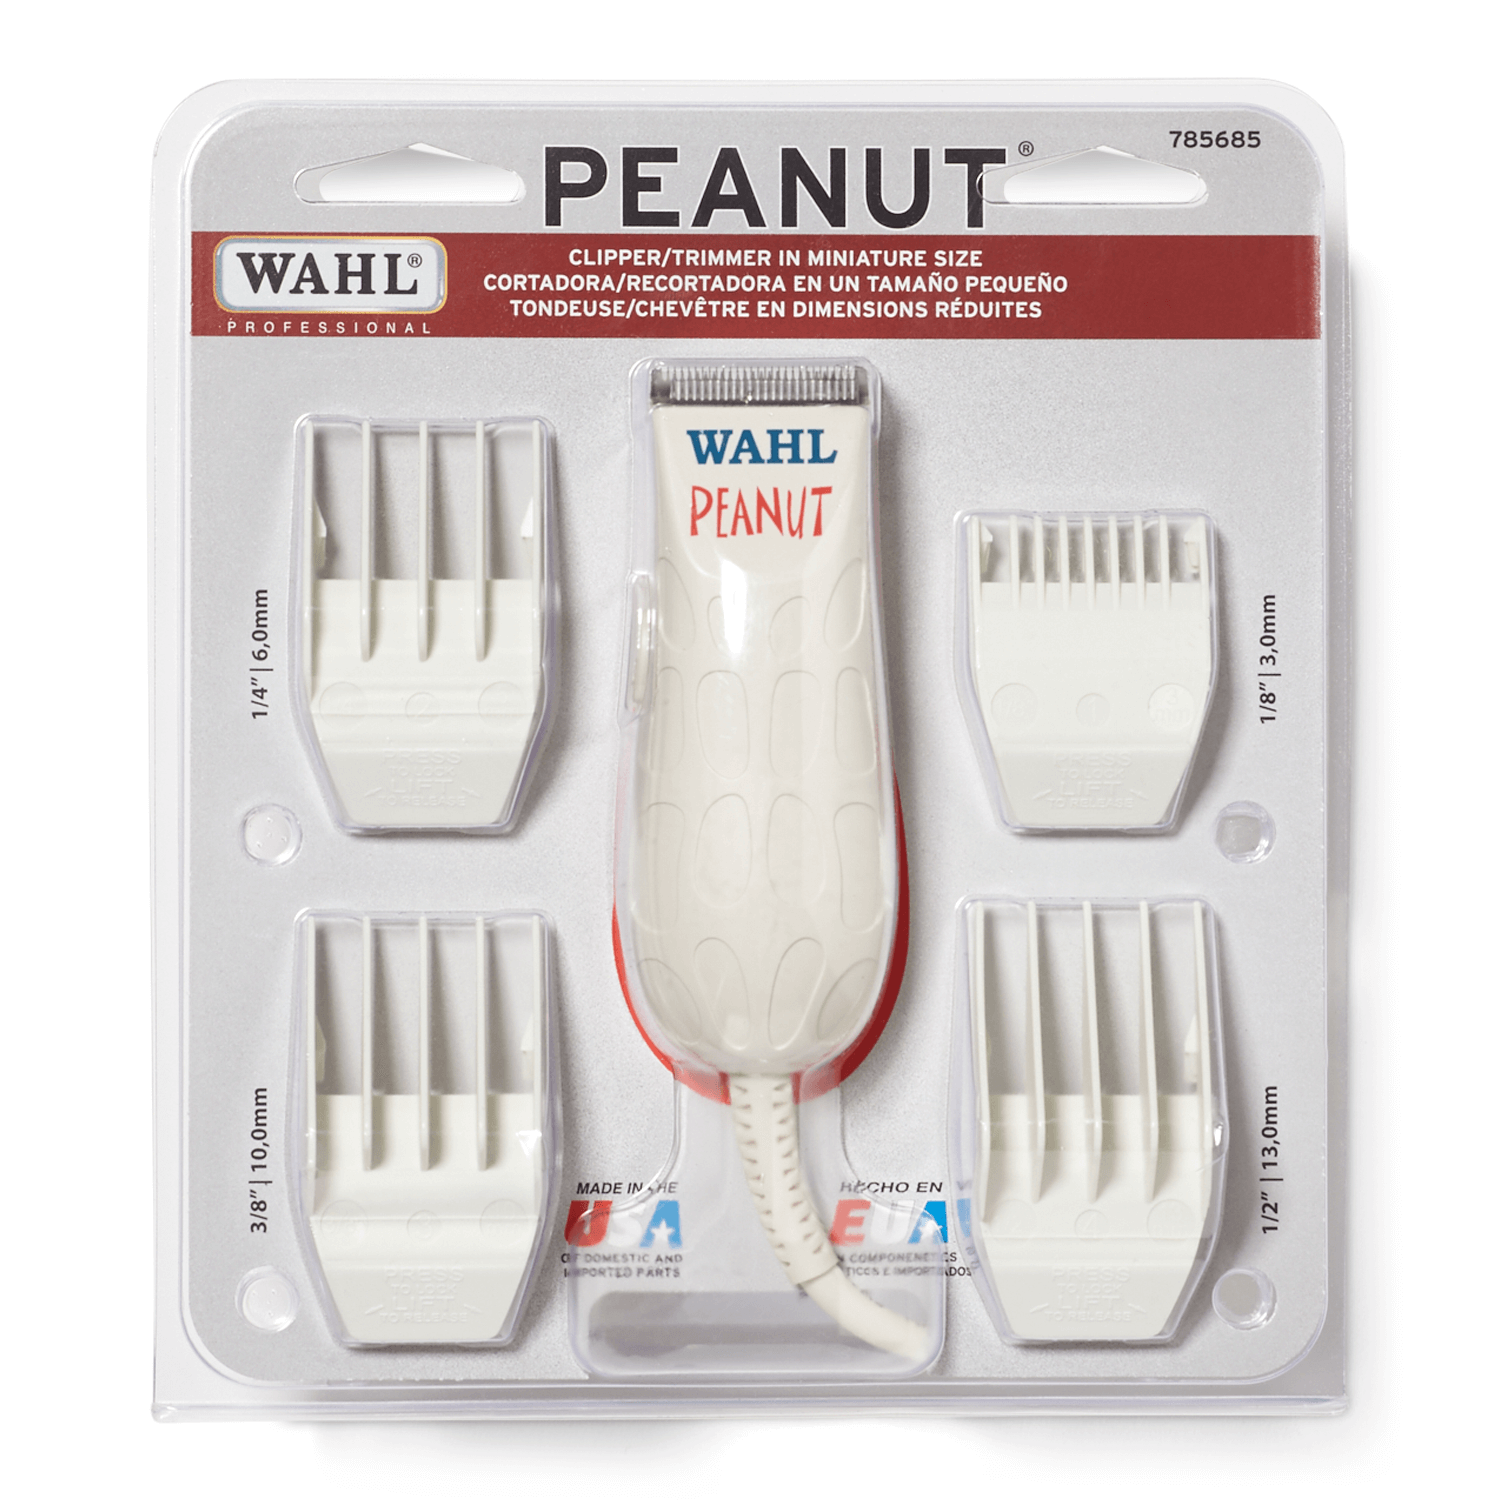 Wahl Peanut Cordless Trimmer with 4-Attachments by Wahl